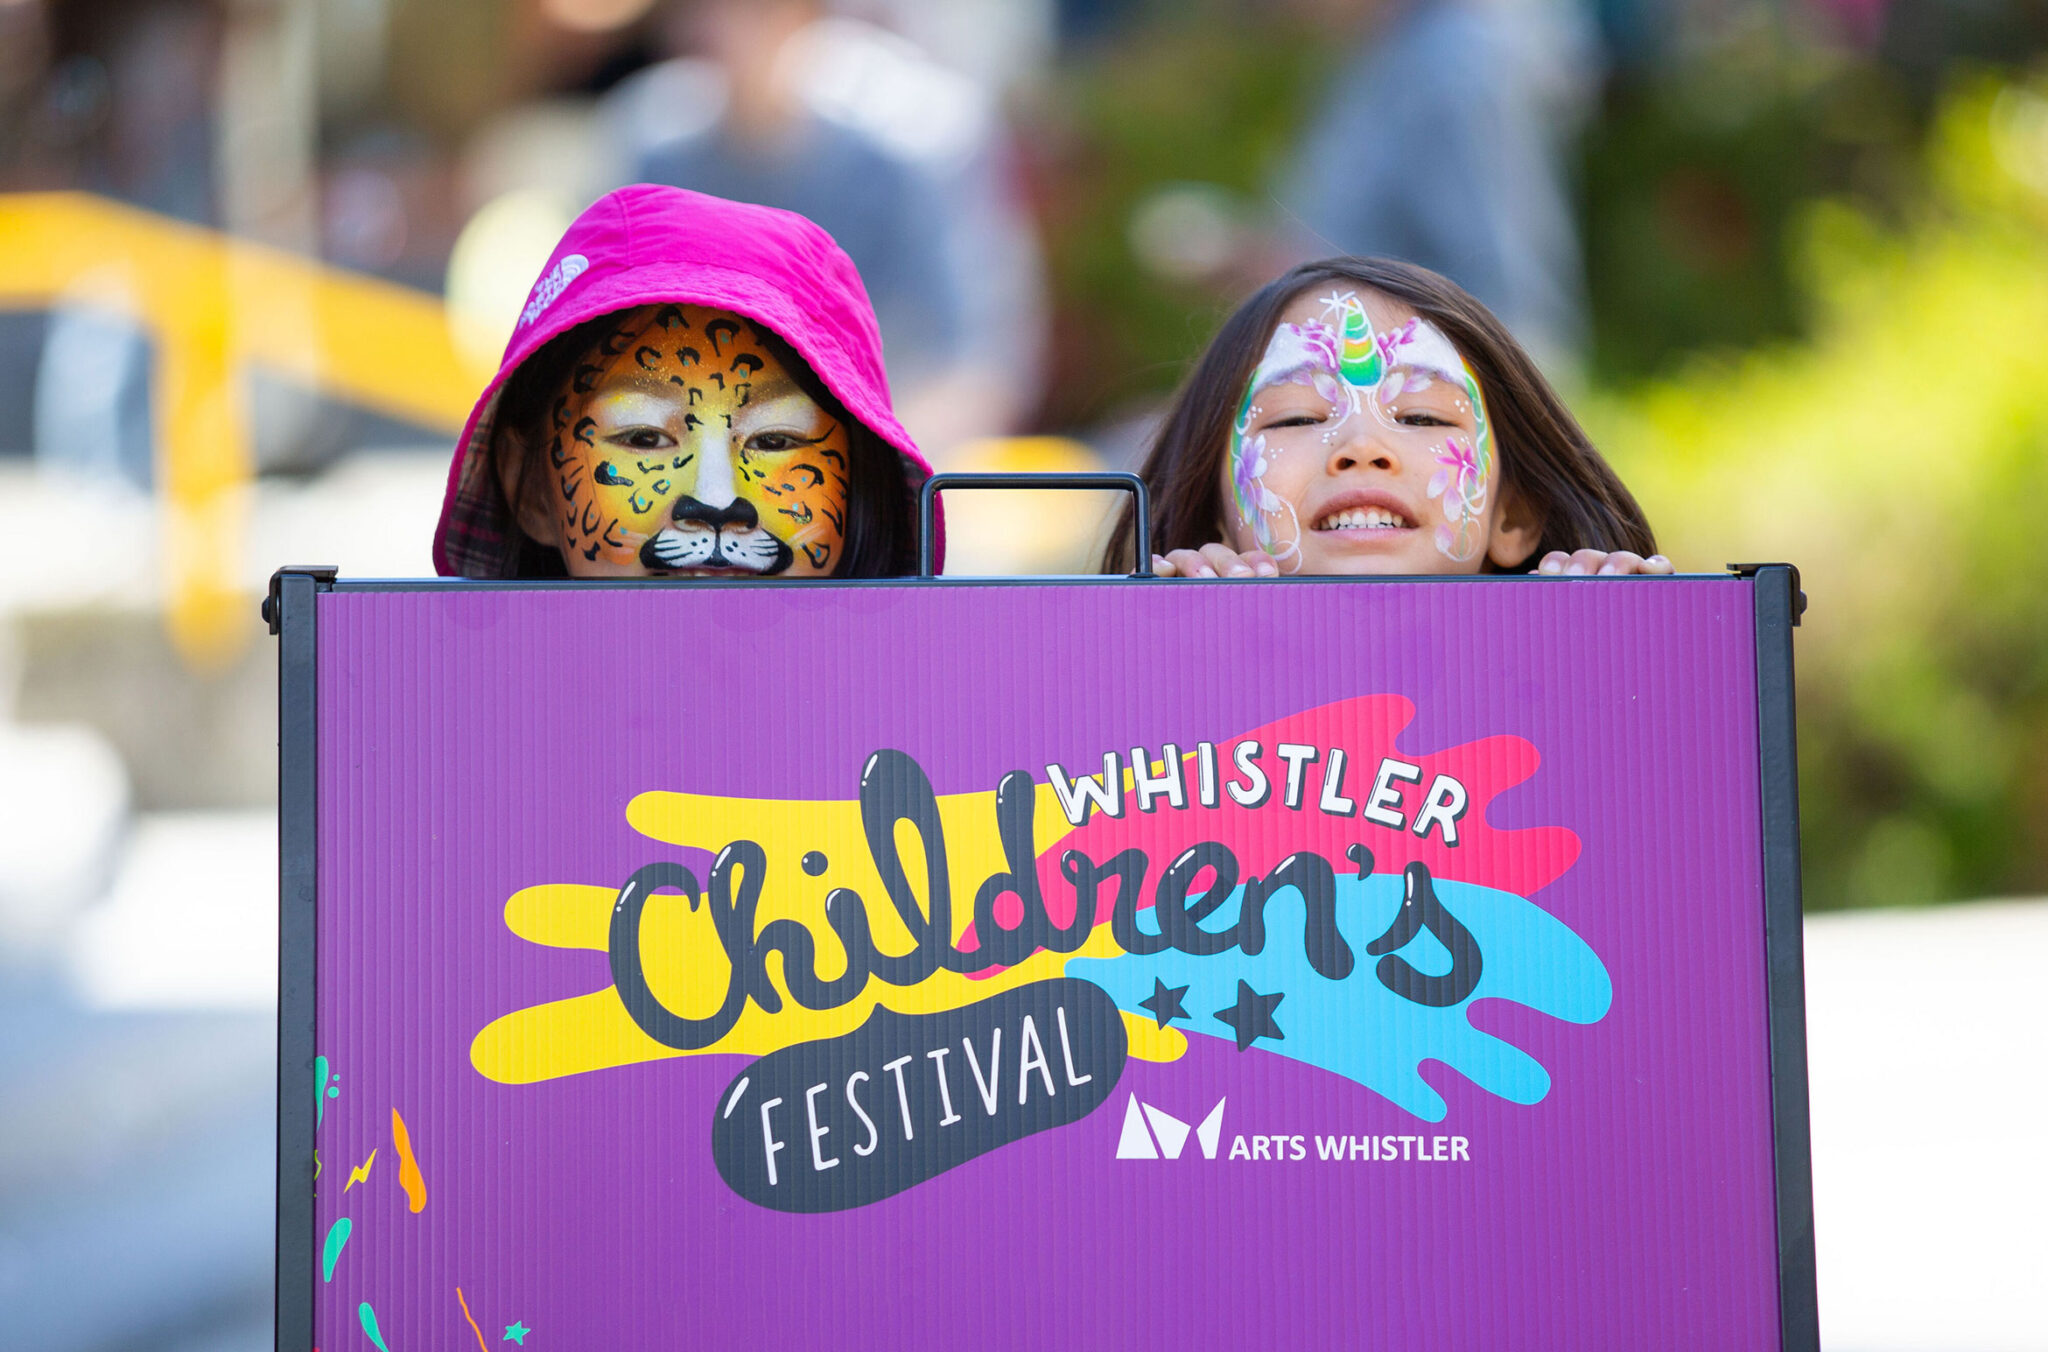 Two painted faces peek out over the top of a Whistler Children's Festival sign.